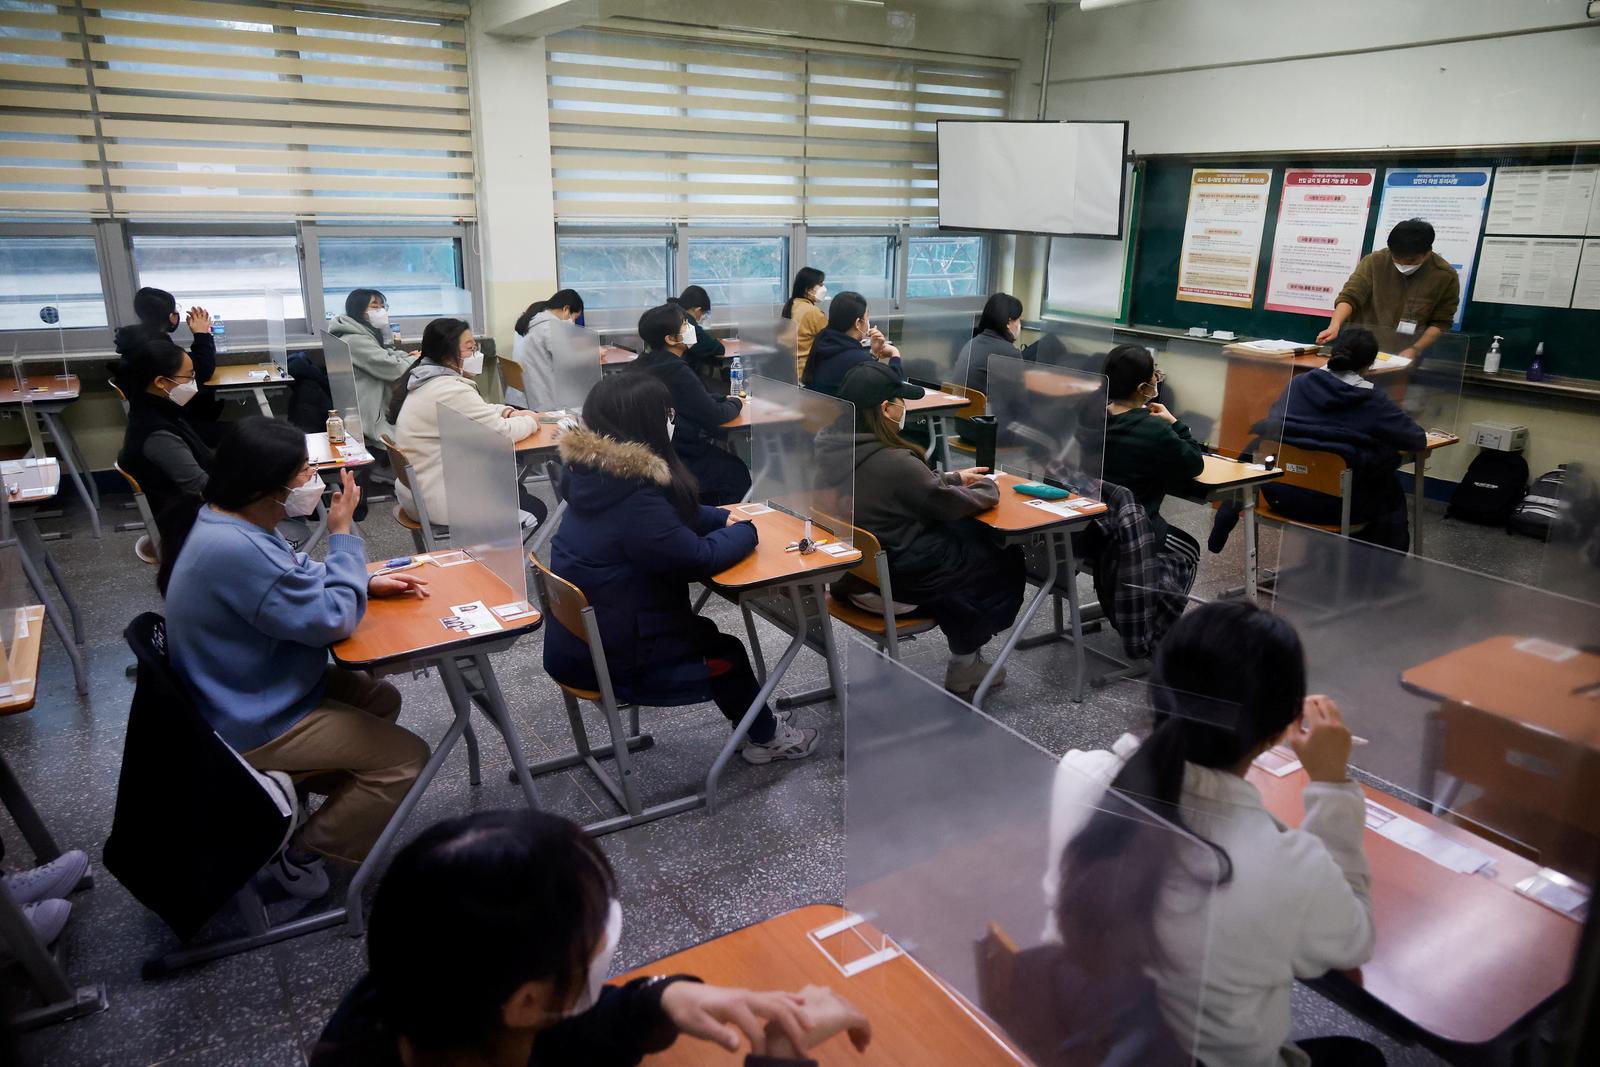 South Korea students sit college exam behind plastic barriers and in hospitals due to COVID-19